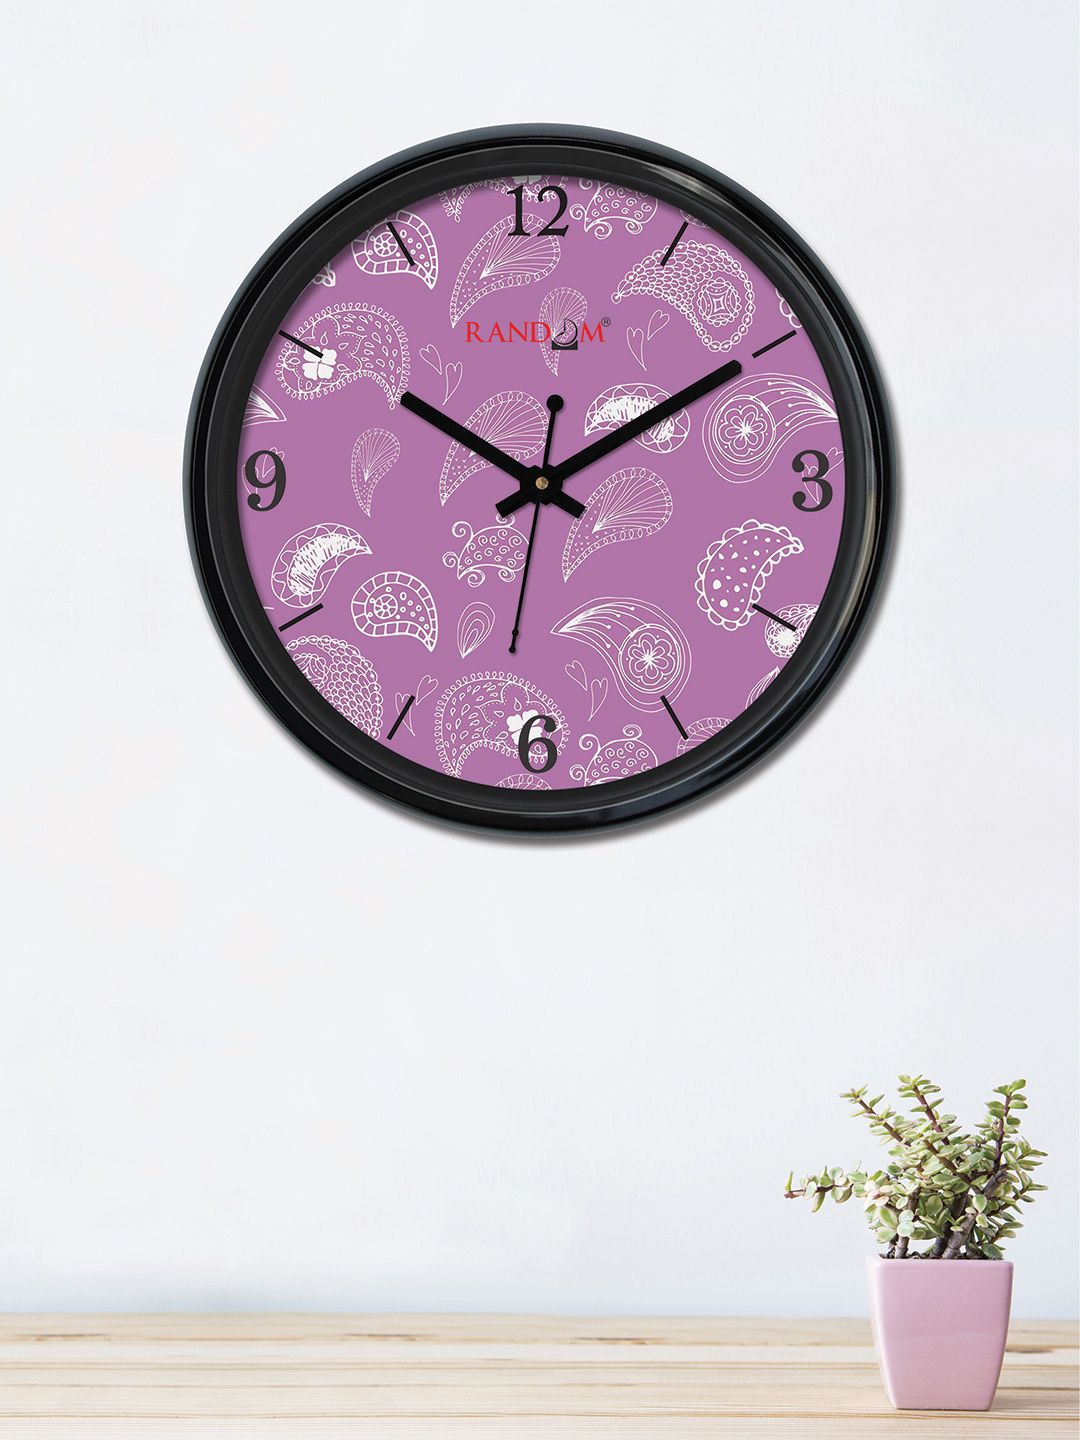 RANDOM Lavender & White Round Printed 30 x 30 cm Analogue Wall Clock Price in India